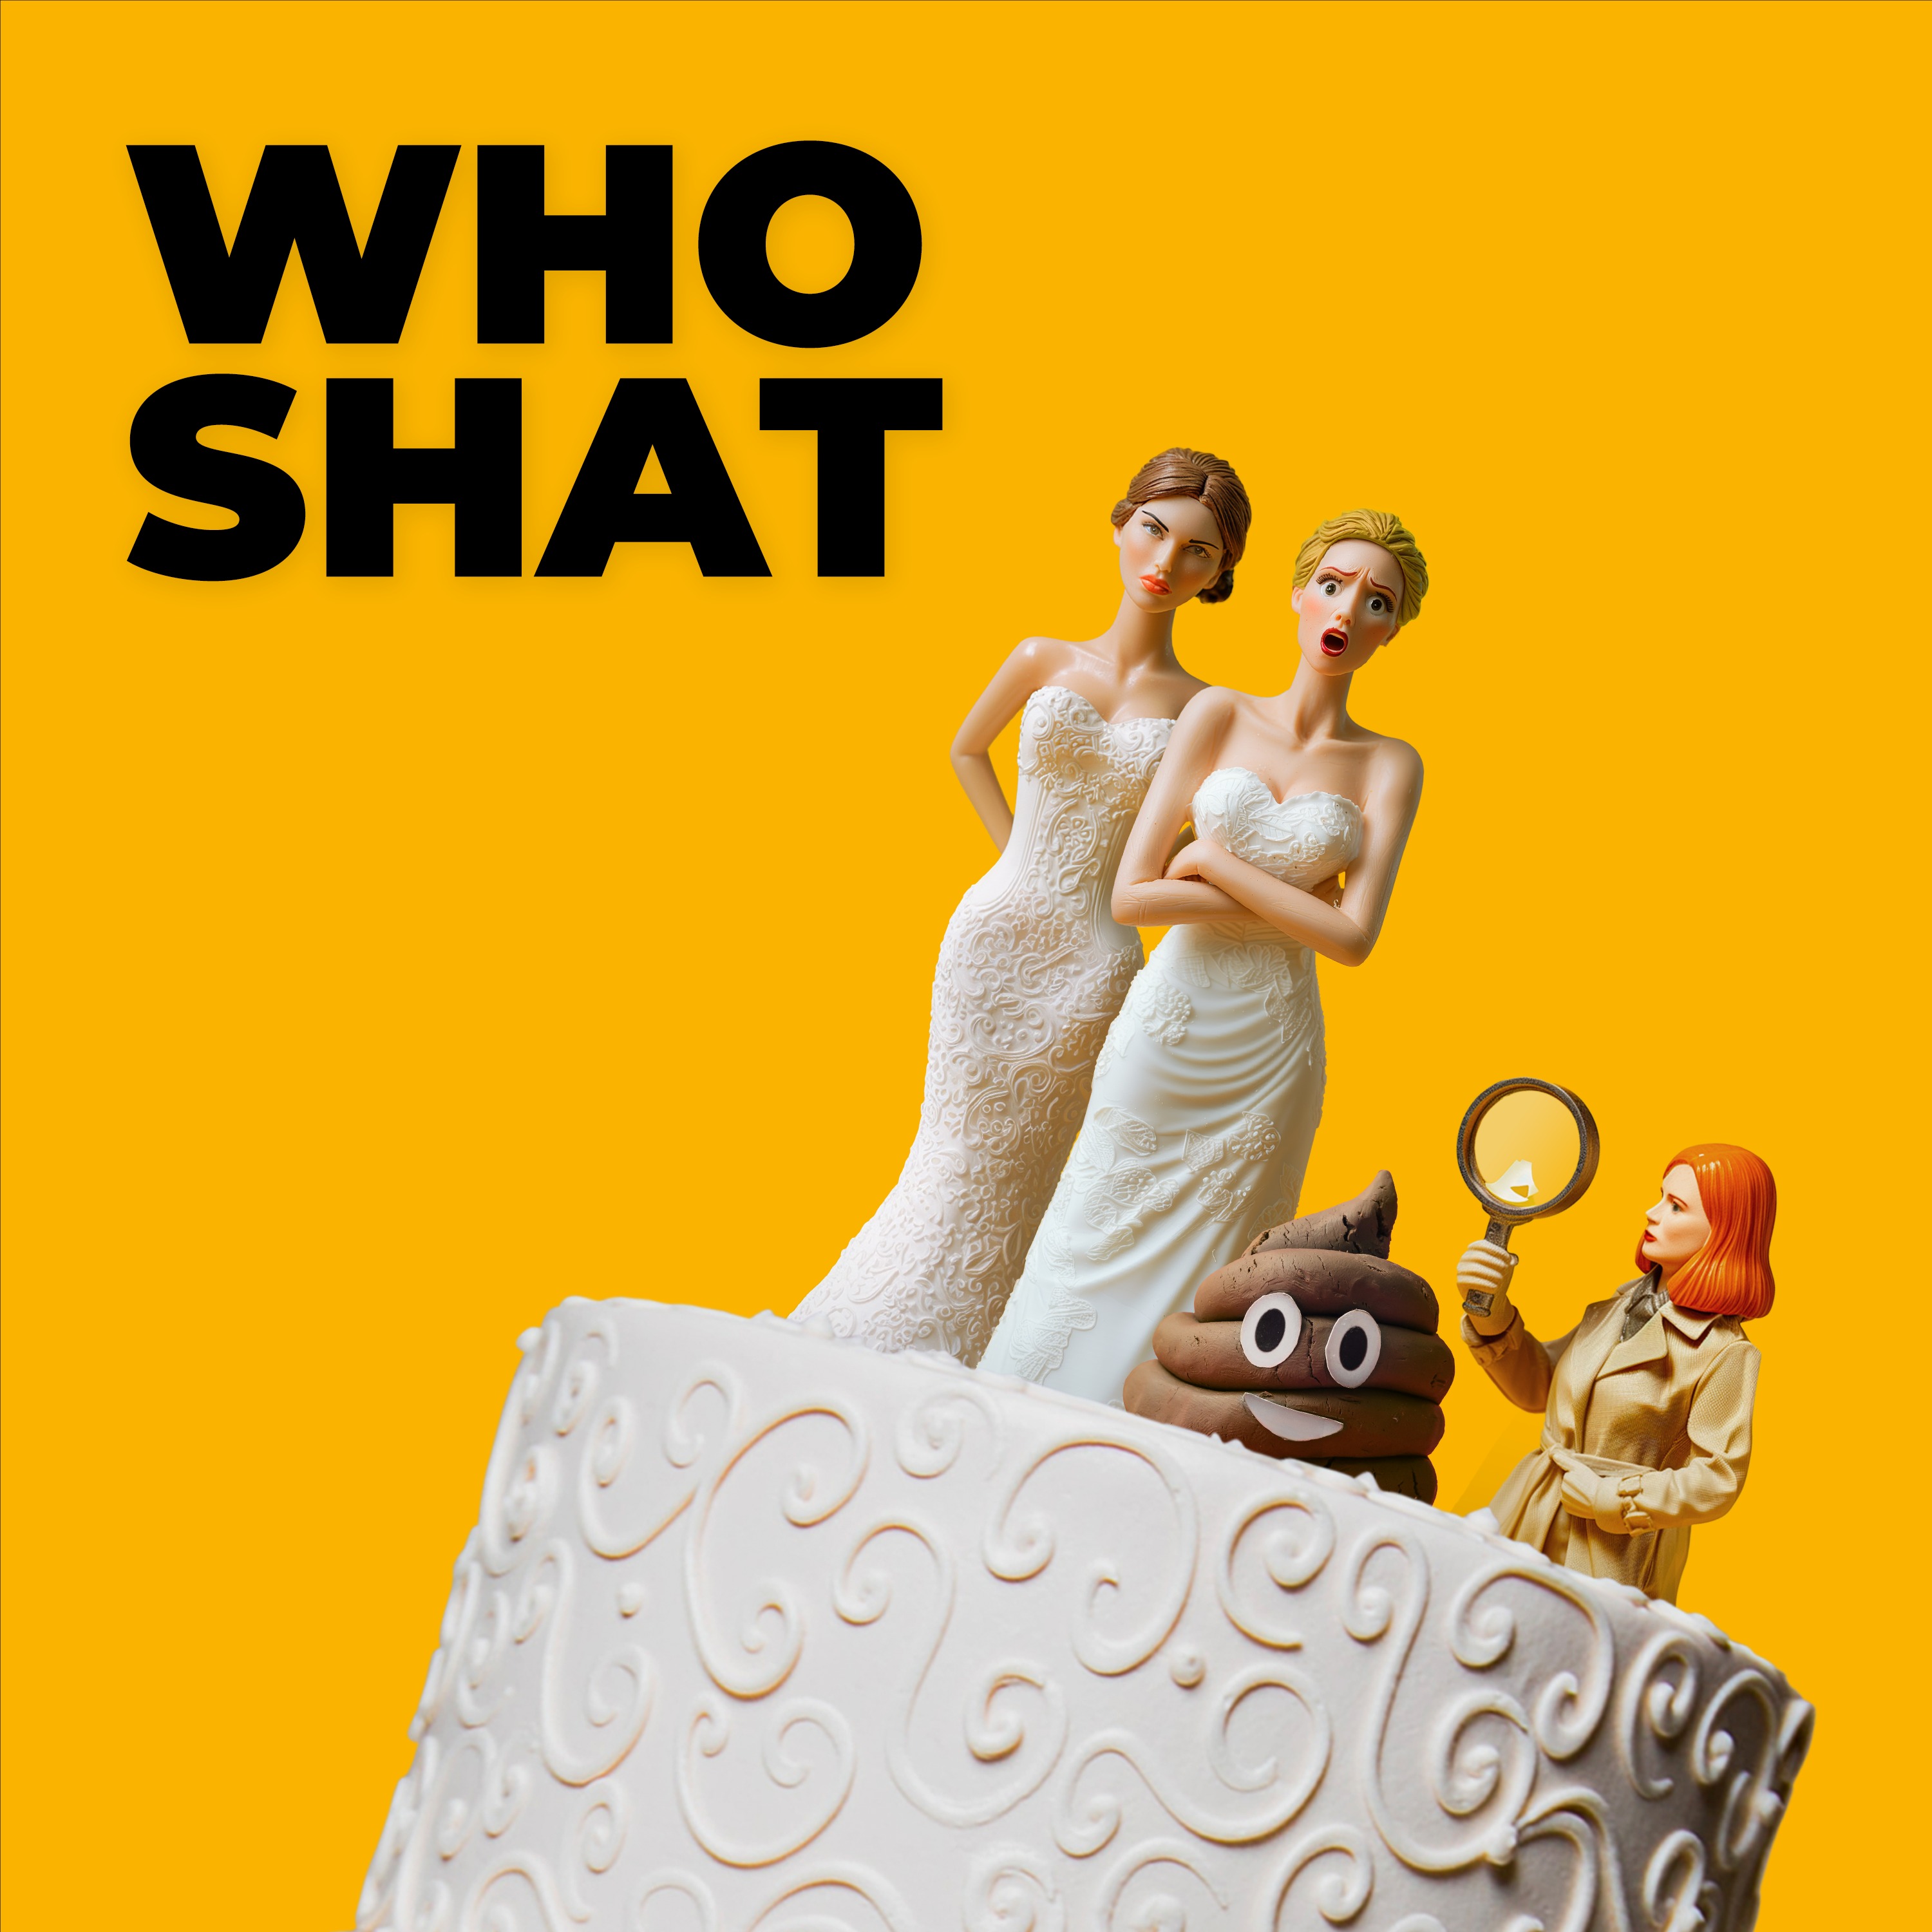 Who shat on the floor at my wedding? And other crimes podcast show image